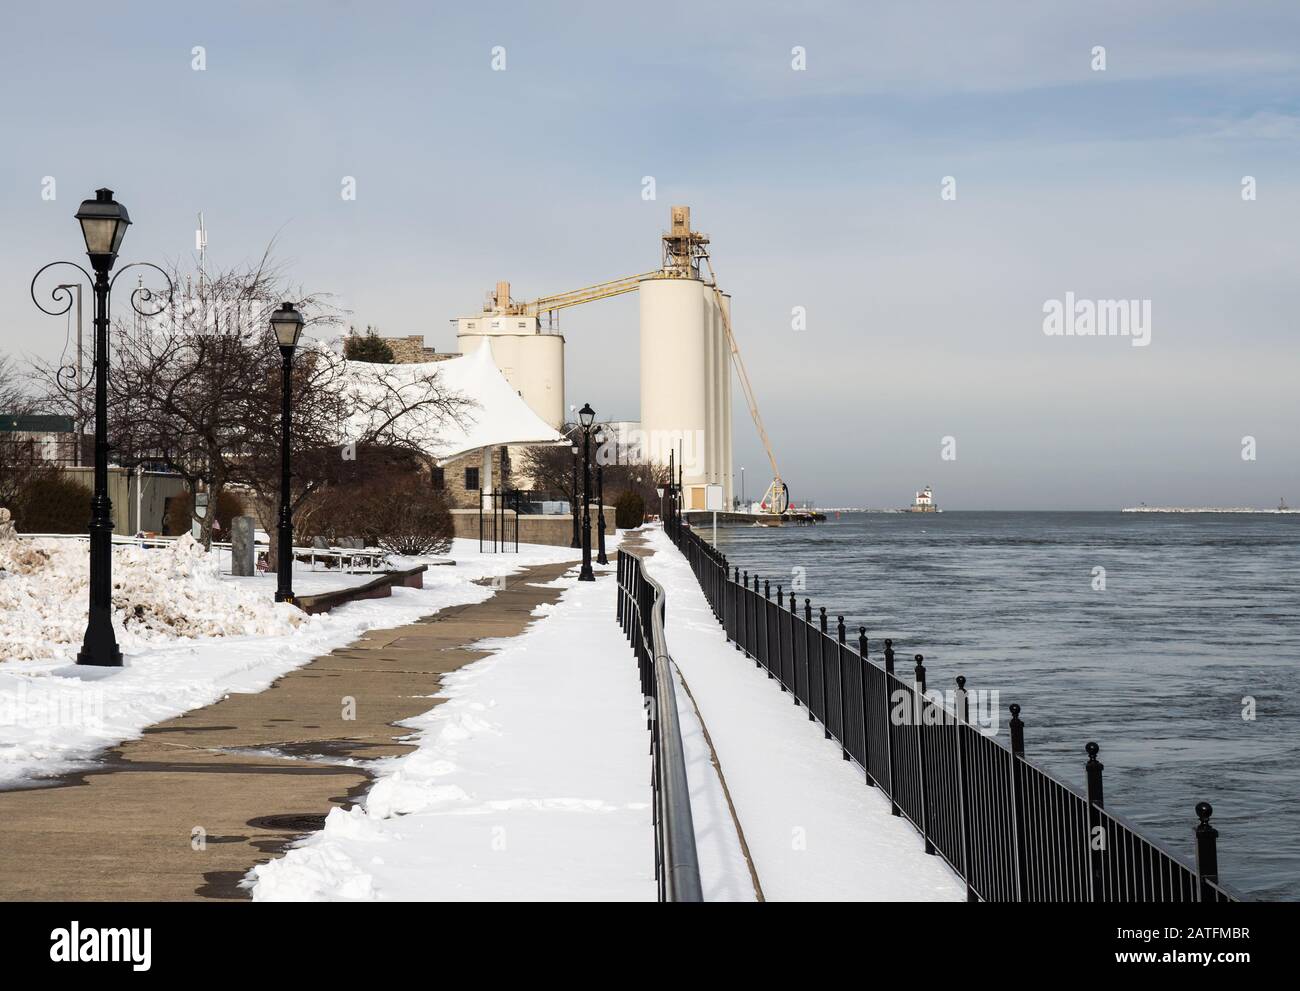 Oswego, New York, USA. January 23, 2020. View of a public walkway facing the Port of Oswego and lake Ontario in Oswego, New York on a winter afternoon Stock Photo